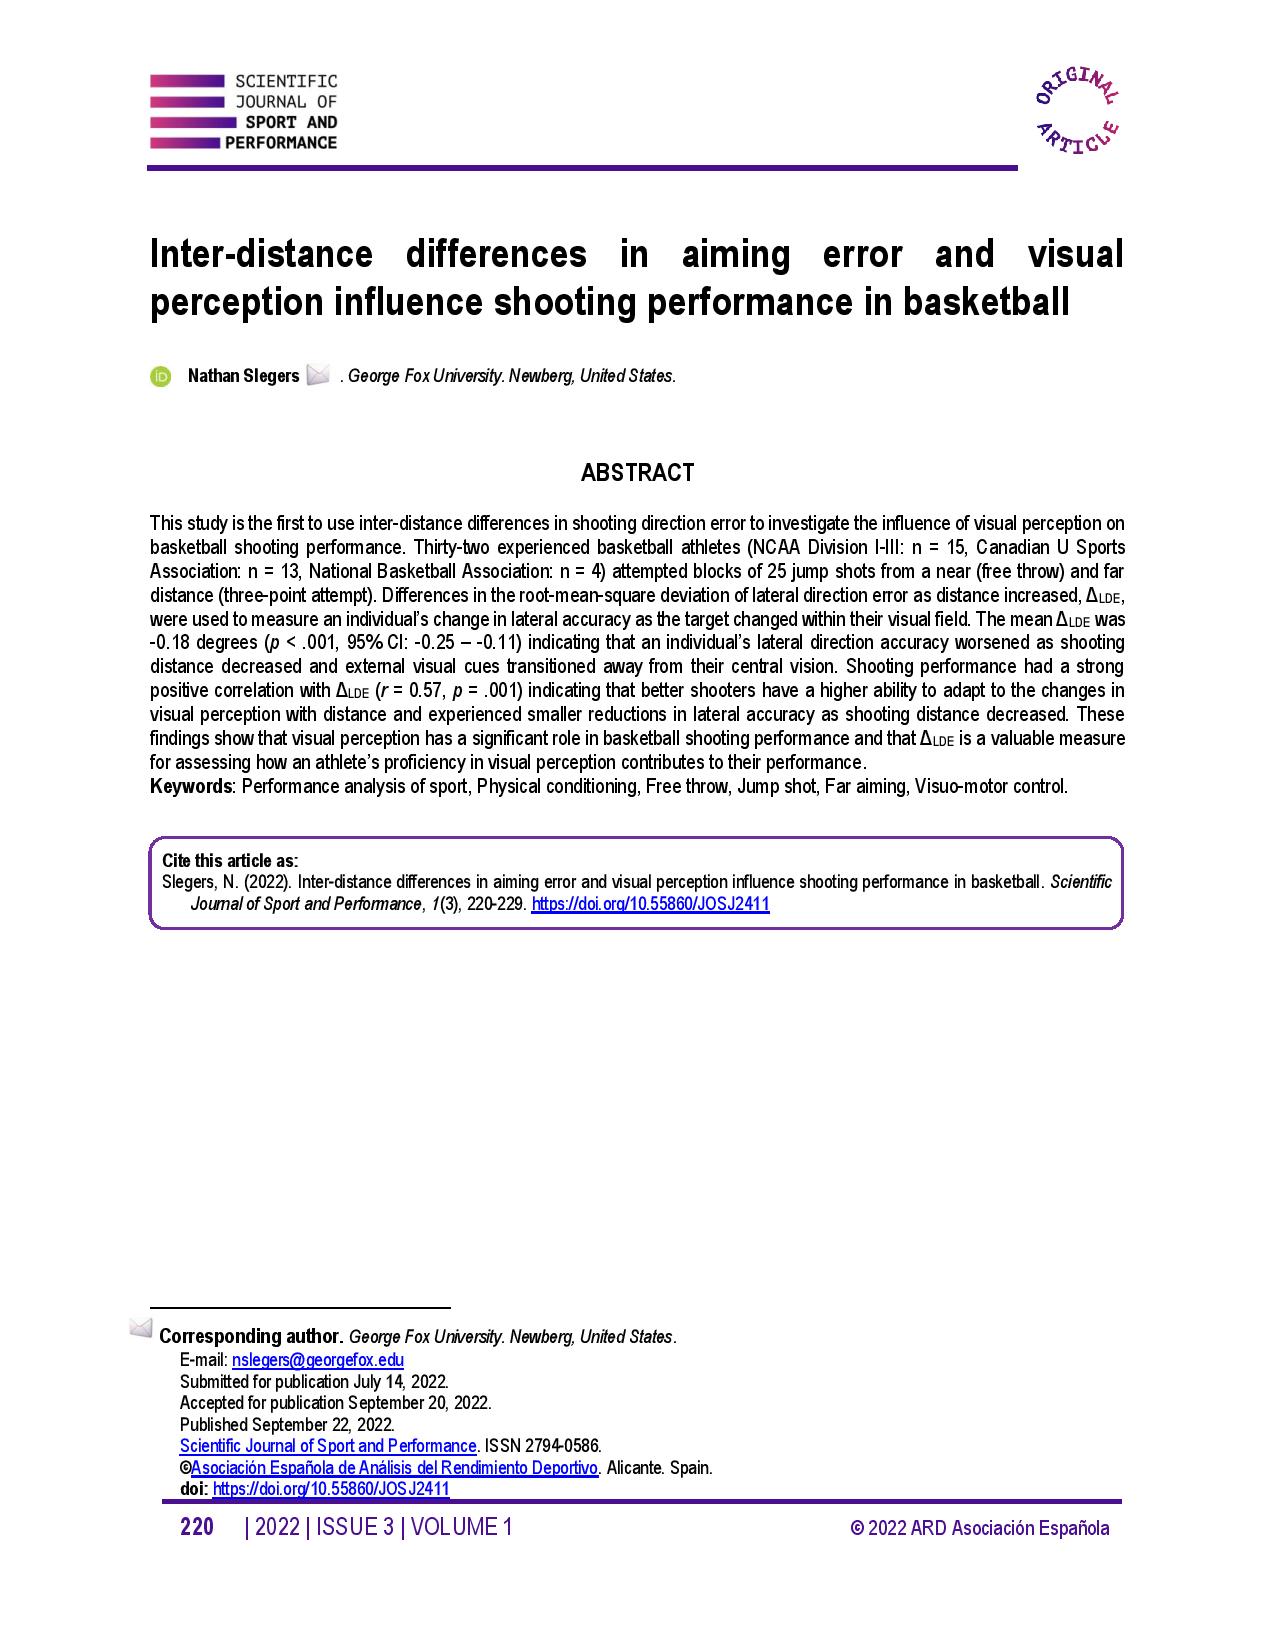 Inter-distance differences in aiming error and visual perception influence shooting performance in basketball